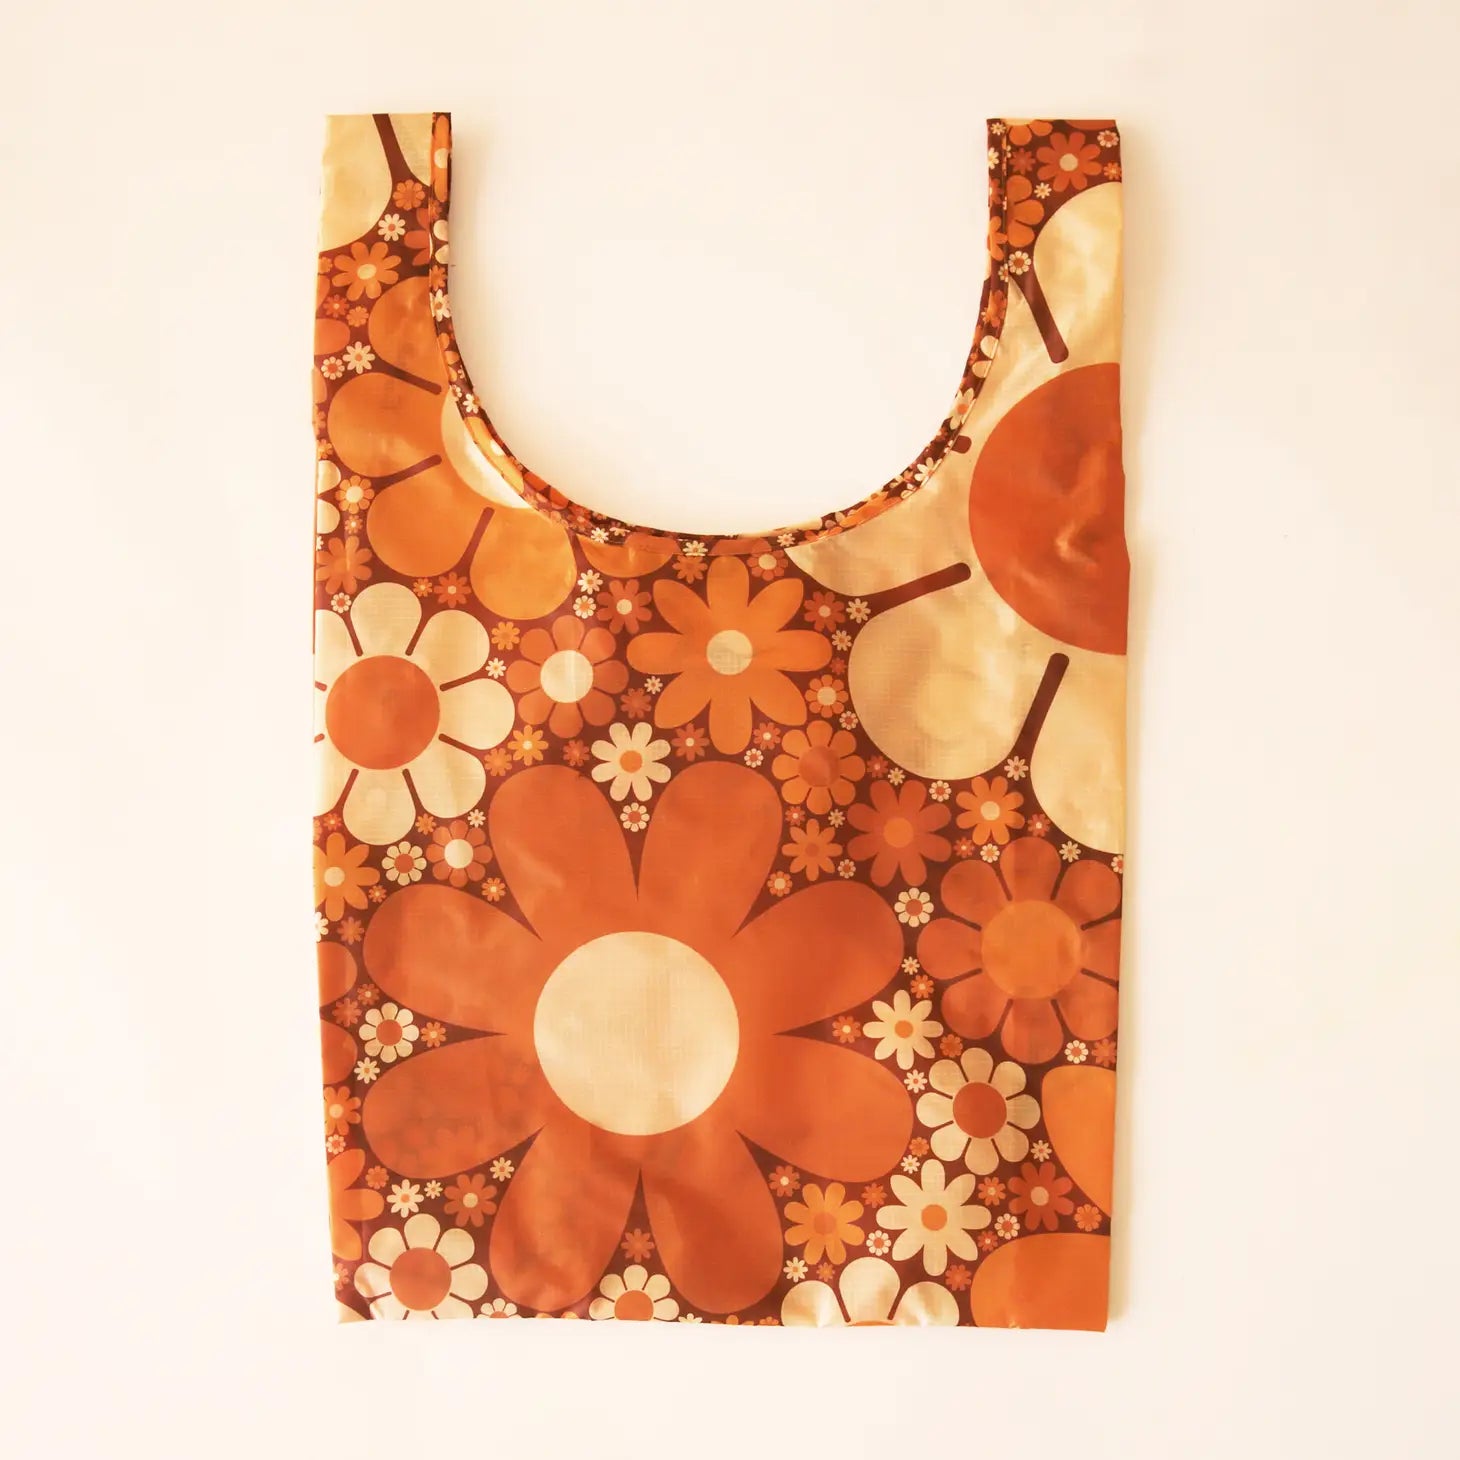 An orange reusable nylon tote bag with a swoop opening and a variety of different sized daisies all ranging in tones of warm creams, light yellow and oranges.